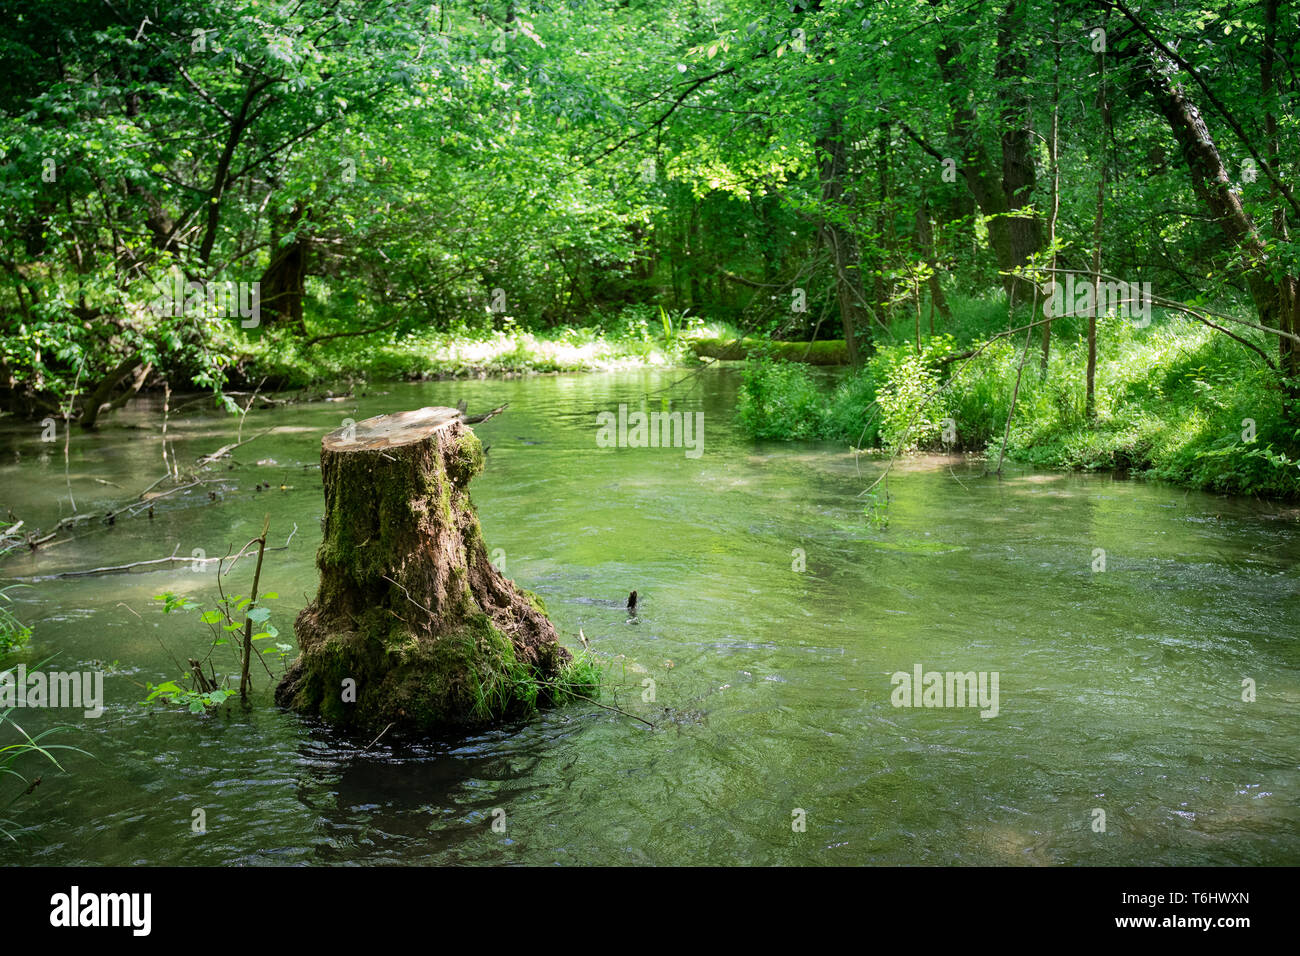 Flooded water stream in woodland, with a cut down tree in the middle surrounded by water in green landscape. Ramo Delizia, Ticino River, Italy. Stock Photo